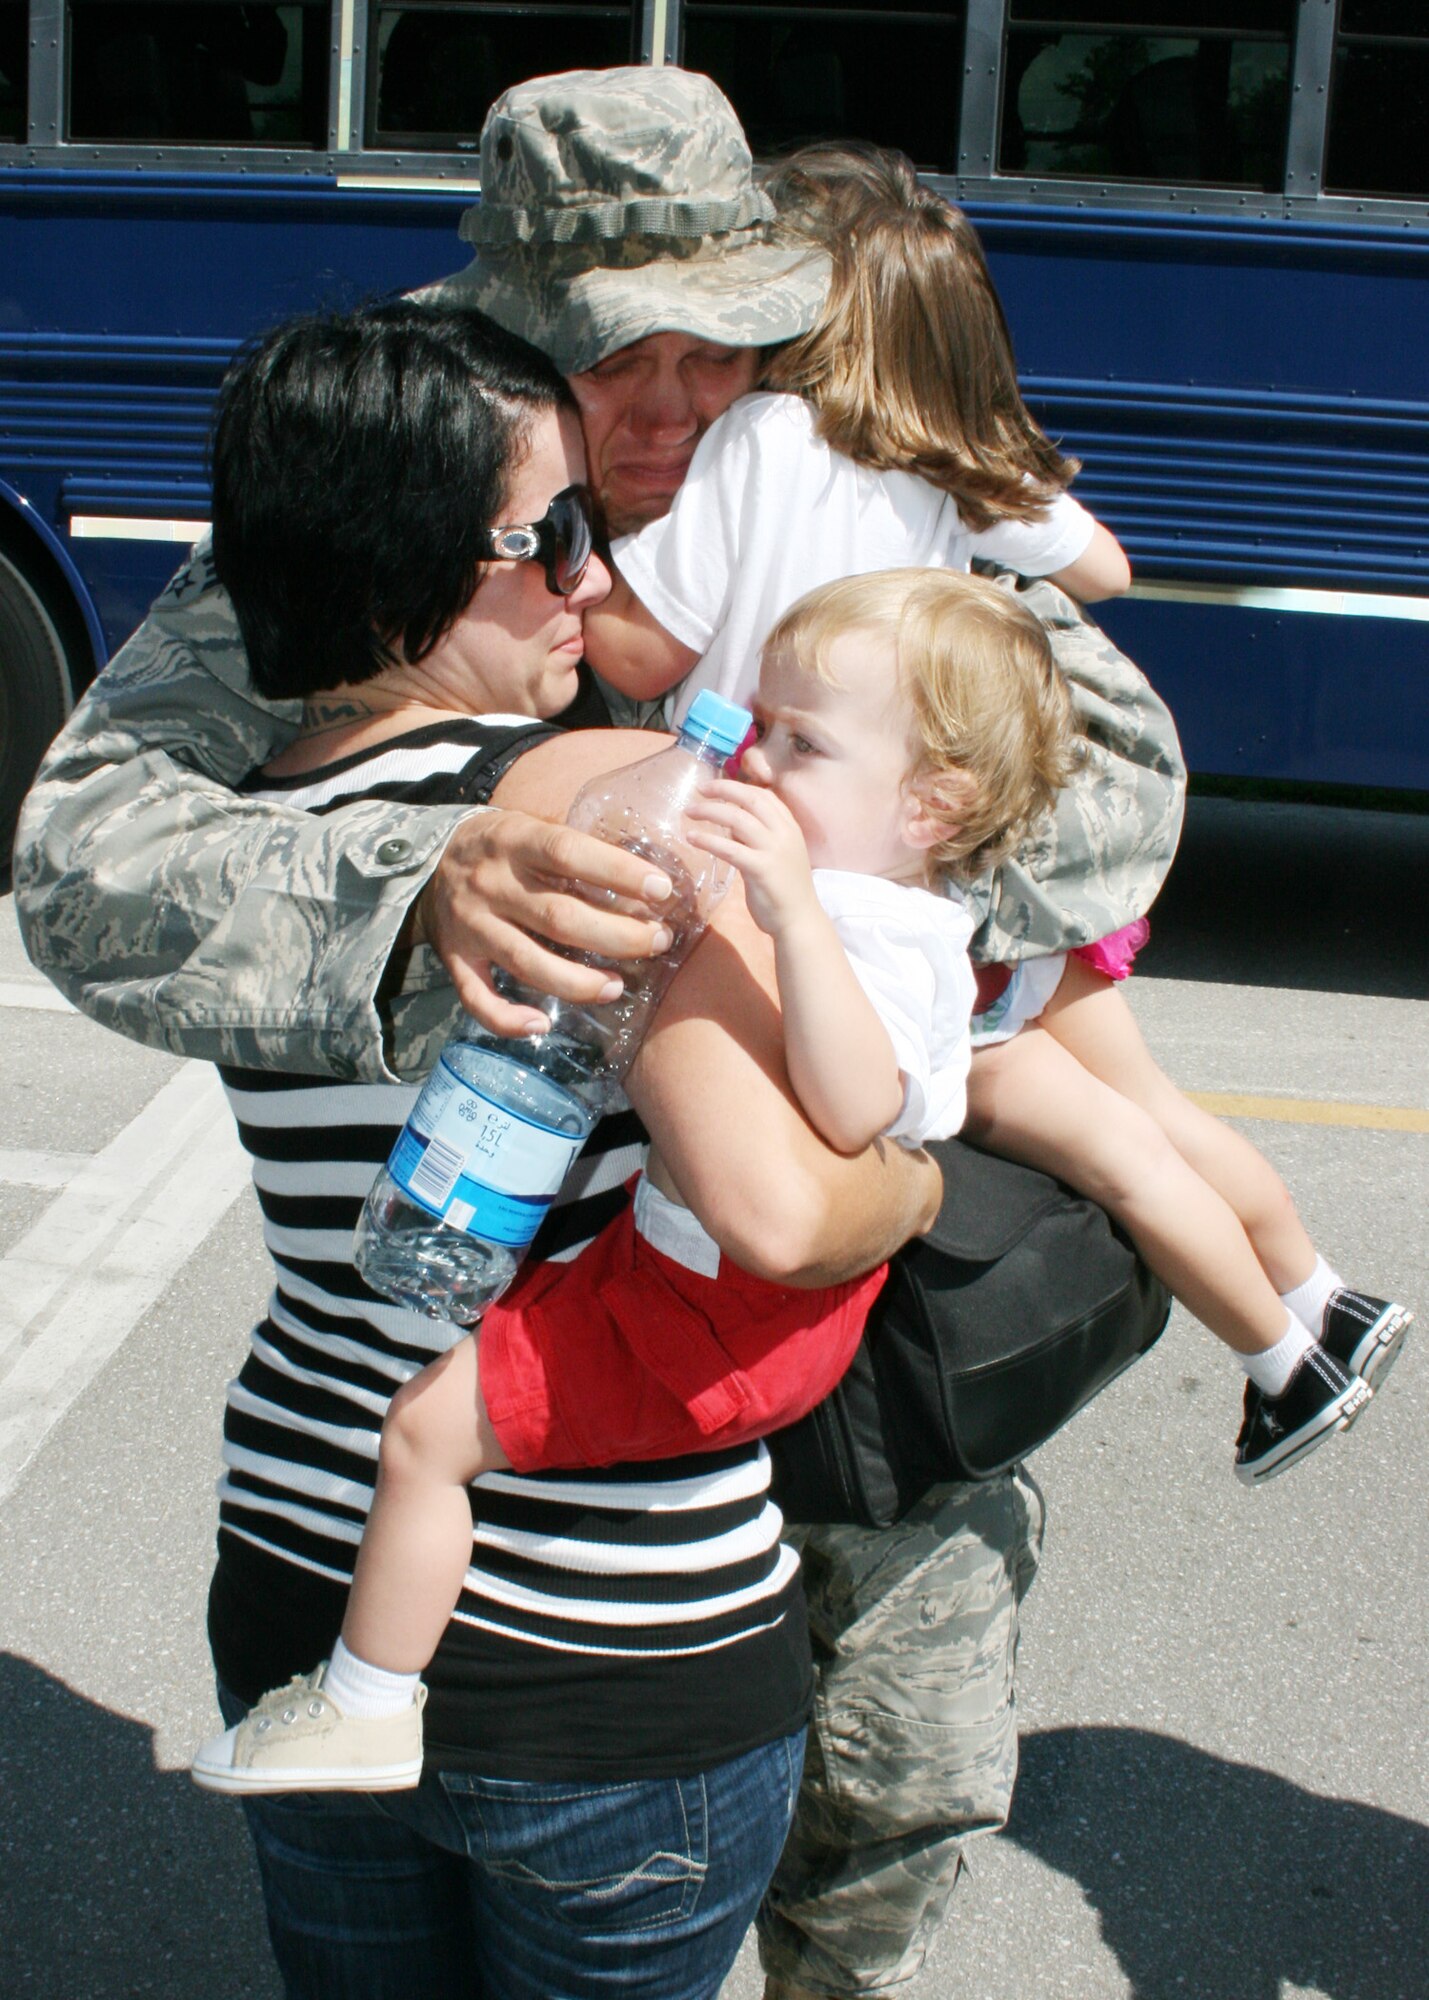 Senior Airman Robert Sochor, 728th Air Control Squadron surveillance technician, receives a welcome home hug after returning from his first Operation Iraqi Freedom deployment with his unit Sept. 21. As one of the Air Force’s four unique Control and Reporting Centers, more than 150 members of the 728th ACS provided command and control of joint air operations using surveillance, identification, weapons control, battle management and theater data links while overseas. (U.S. Air Force photo/2nd Lt. Andrew Caulk)